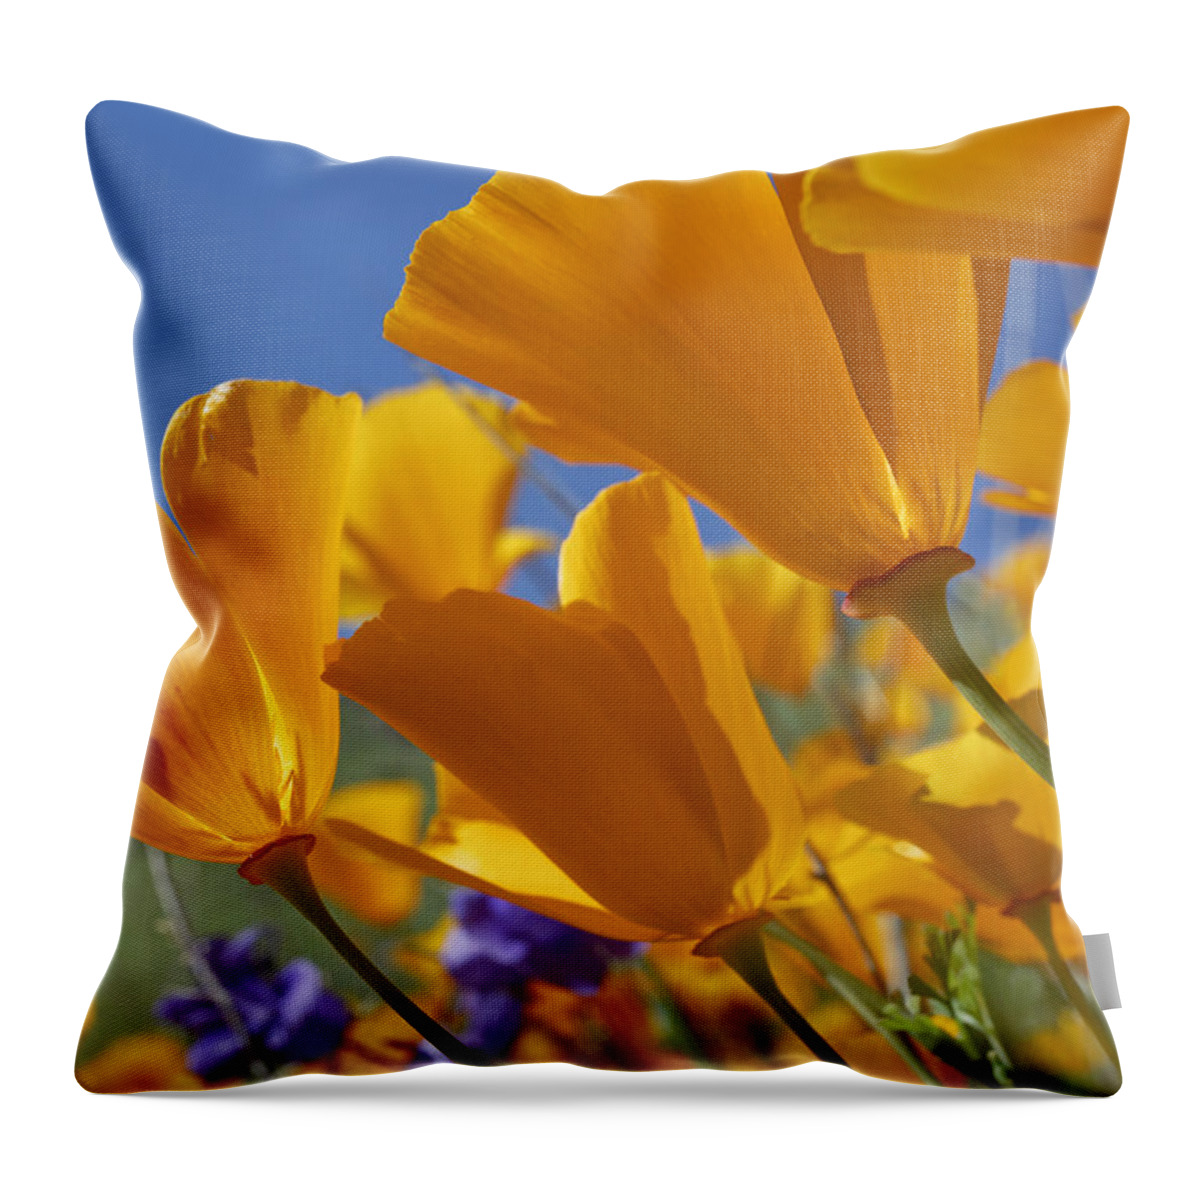 Feb0514 Throw Pillow featuring the photograph California Poppies Antelope Valley #1 by Tim Fitzharris